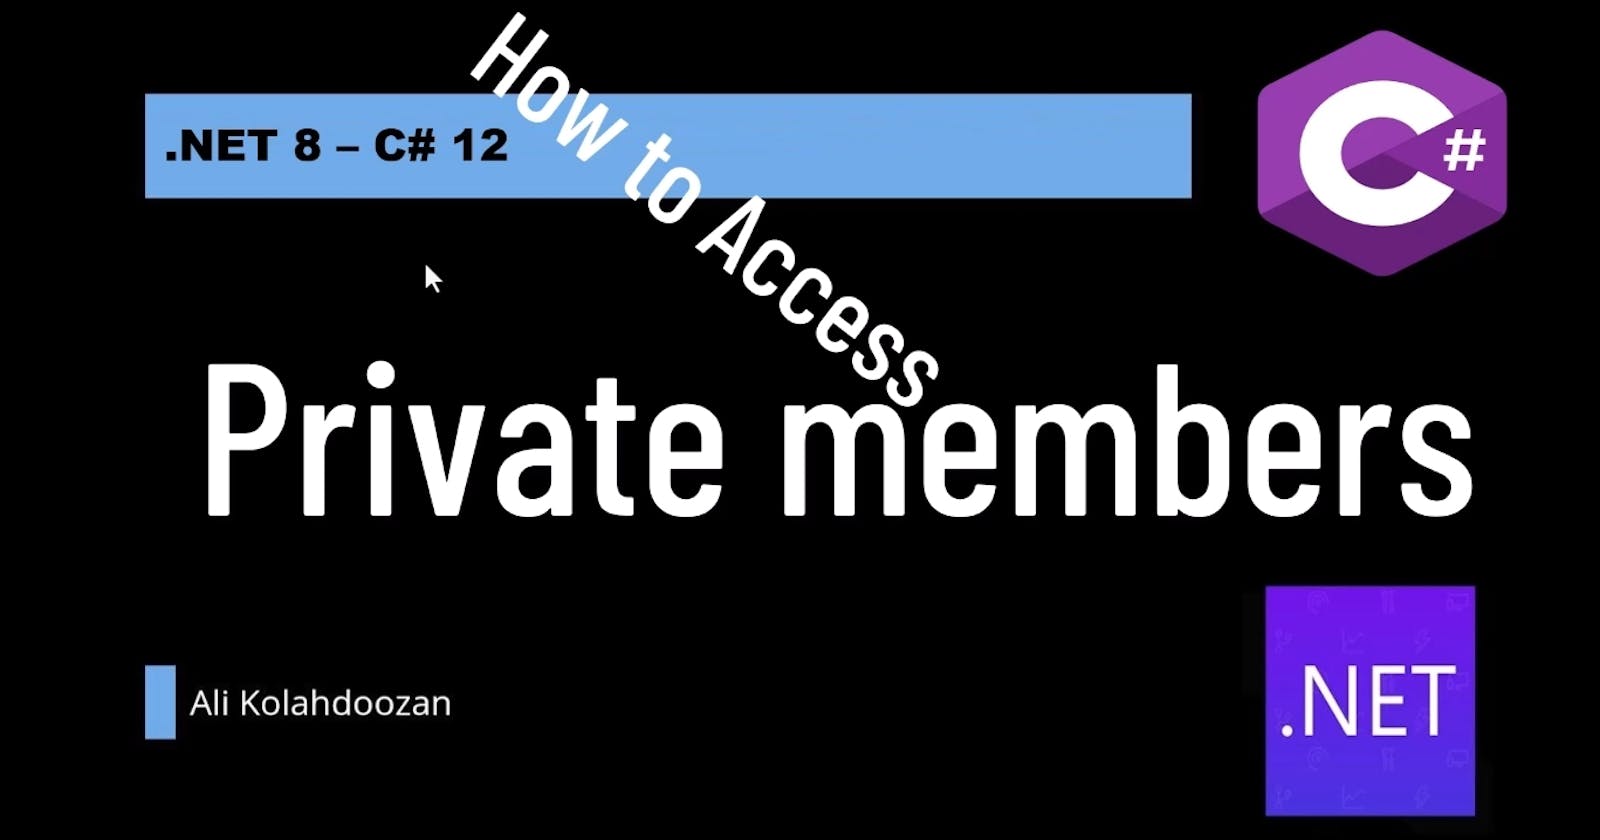 How to Access Private members in C# - 12